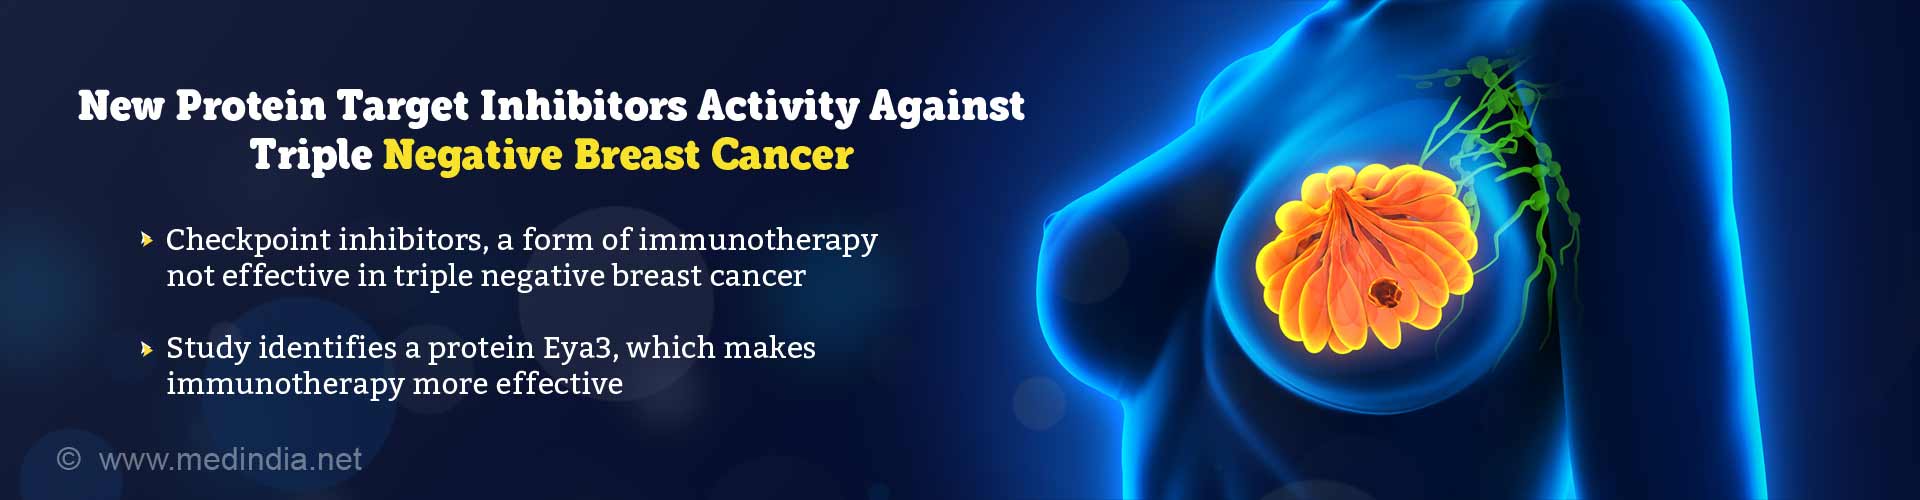 new protein target inhibitors activity against triple negative breast cancer
- checkpoint inhibitors, a form immunotherapy not effective in triple negative breast cancer
- study identifies a protein Eya3, which makes immunotherapy more effective